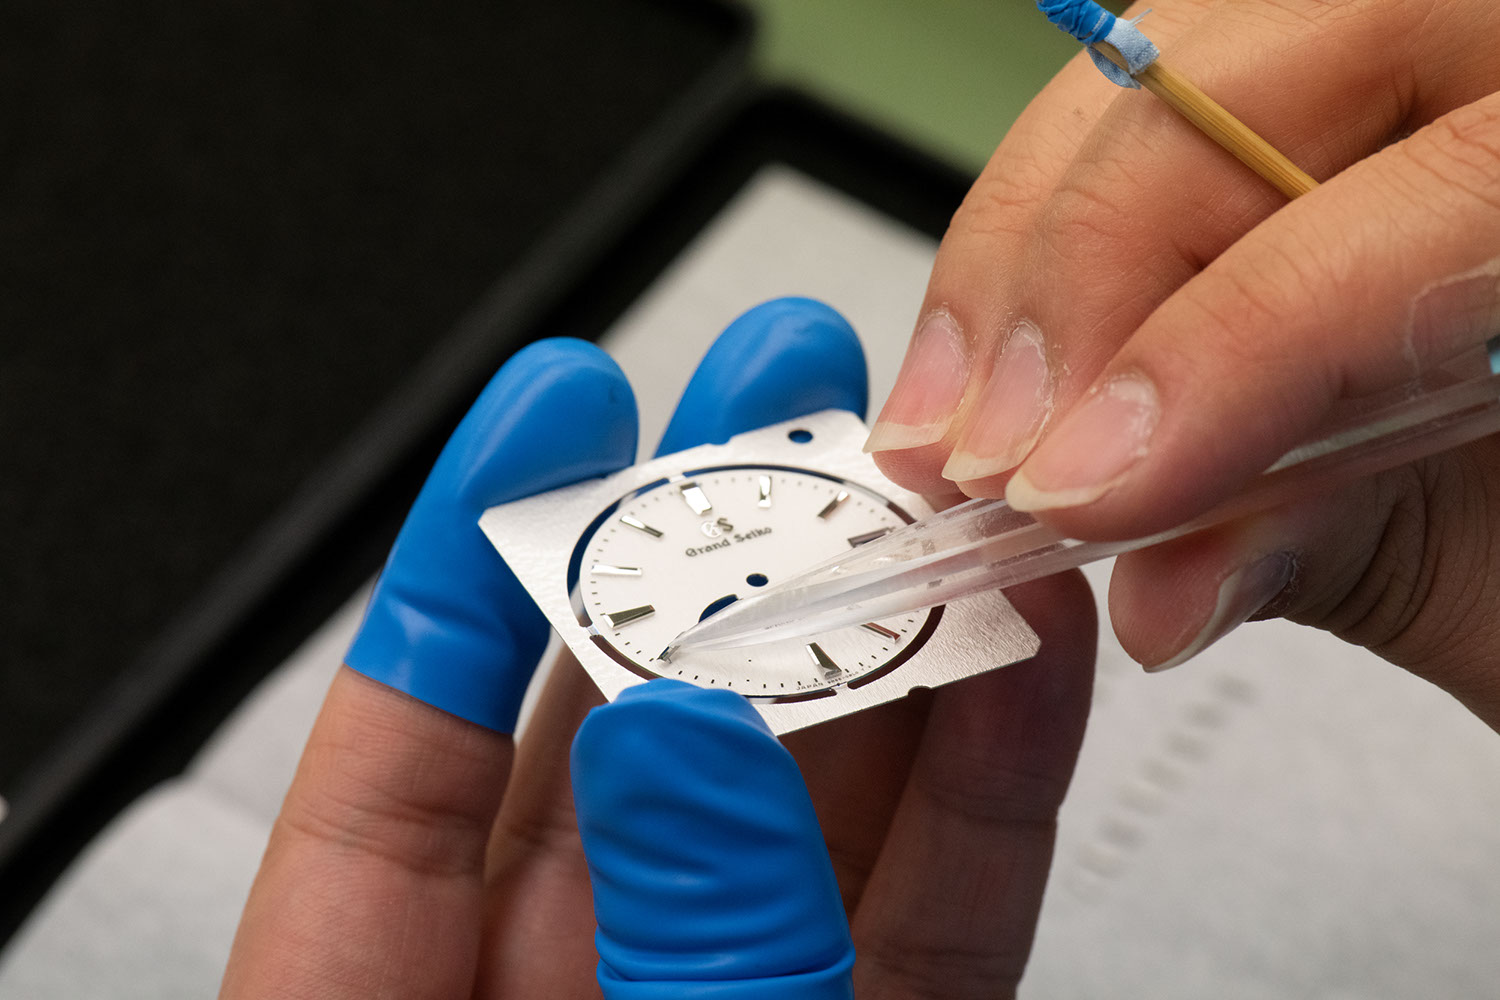 Applying markers to the bare 'Snowflake' dial (Image: Grand Seiko)